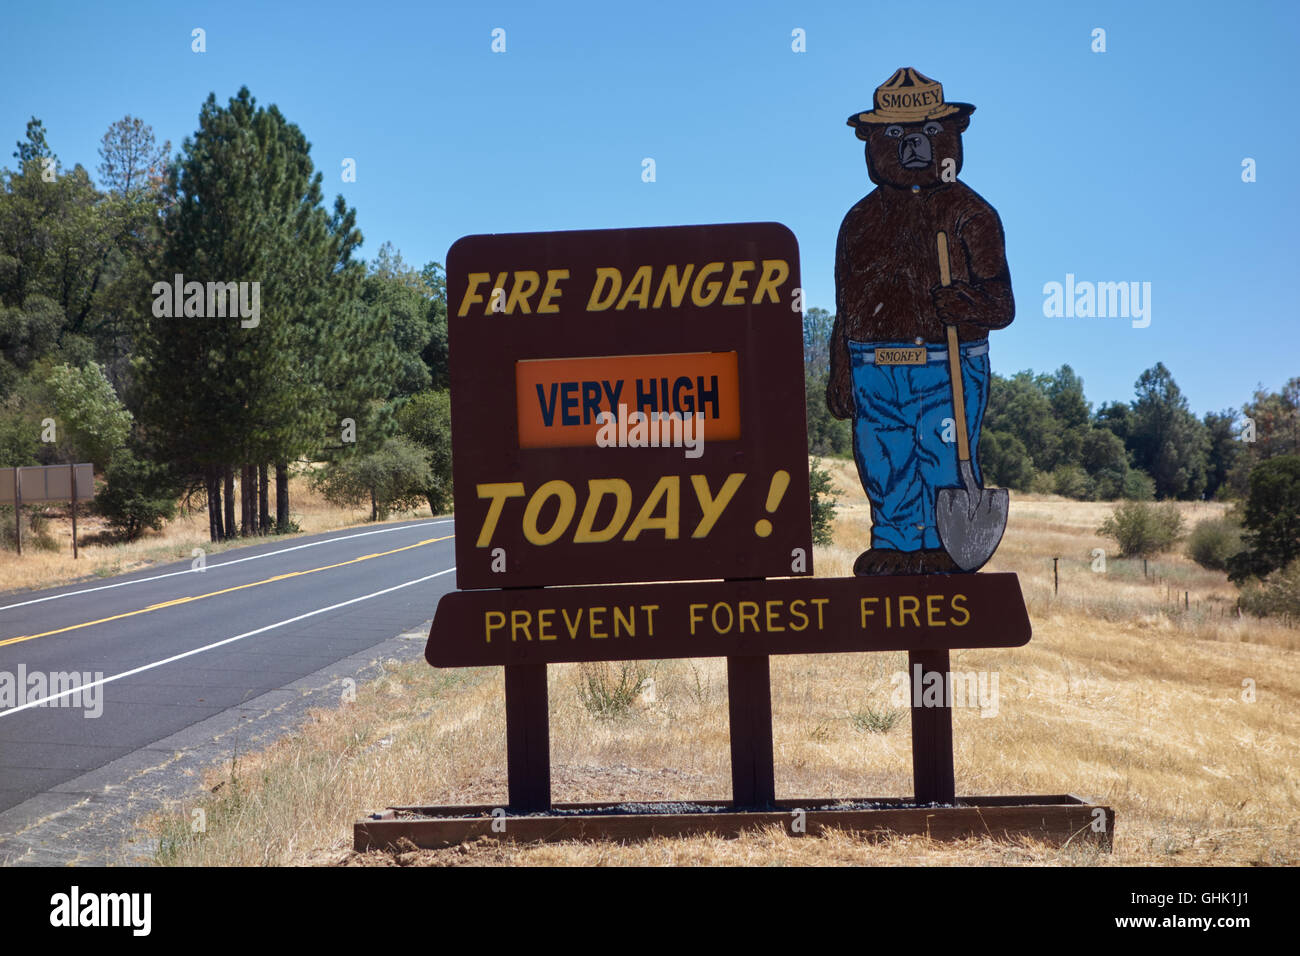 Very high risk of fire warning sign on side of road with figure of Yogi bear. Near Yosemite National Park.  California. USA Stock Photo